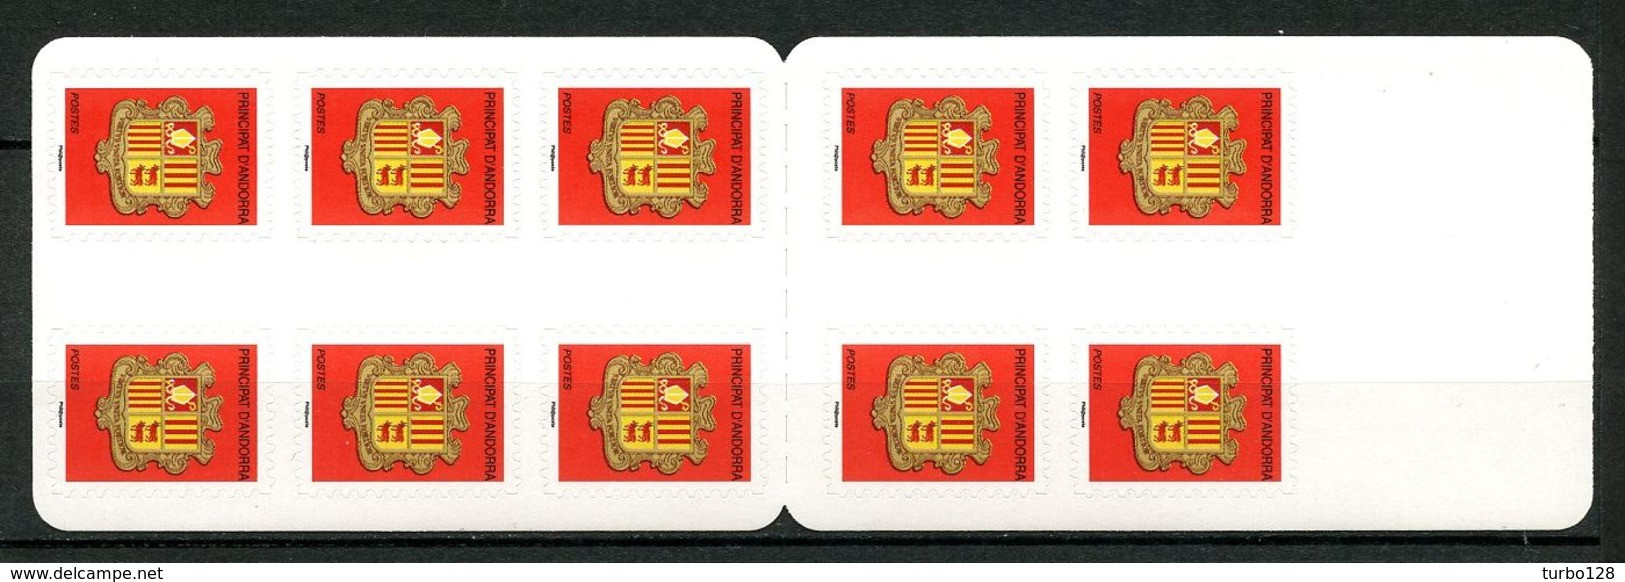 ANDORRE 2007 Carnet N° 13 ( 638 X 10 ) ** Neuf MNH Superbe C 20 € Armoiries Faune Vaches Animaux Coats Of Arms - Carnets